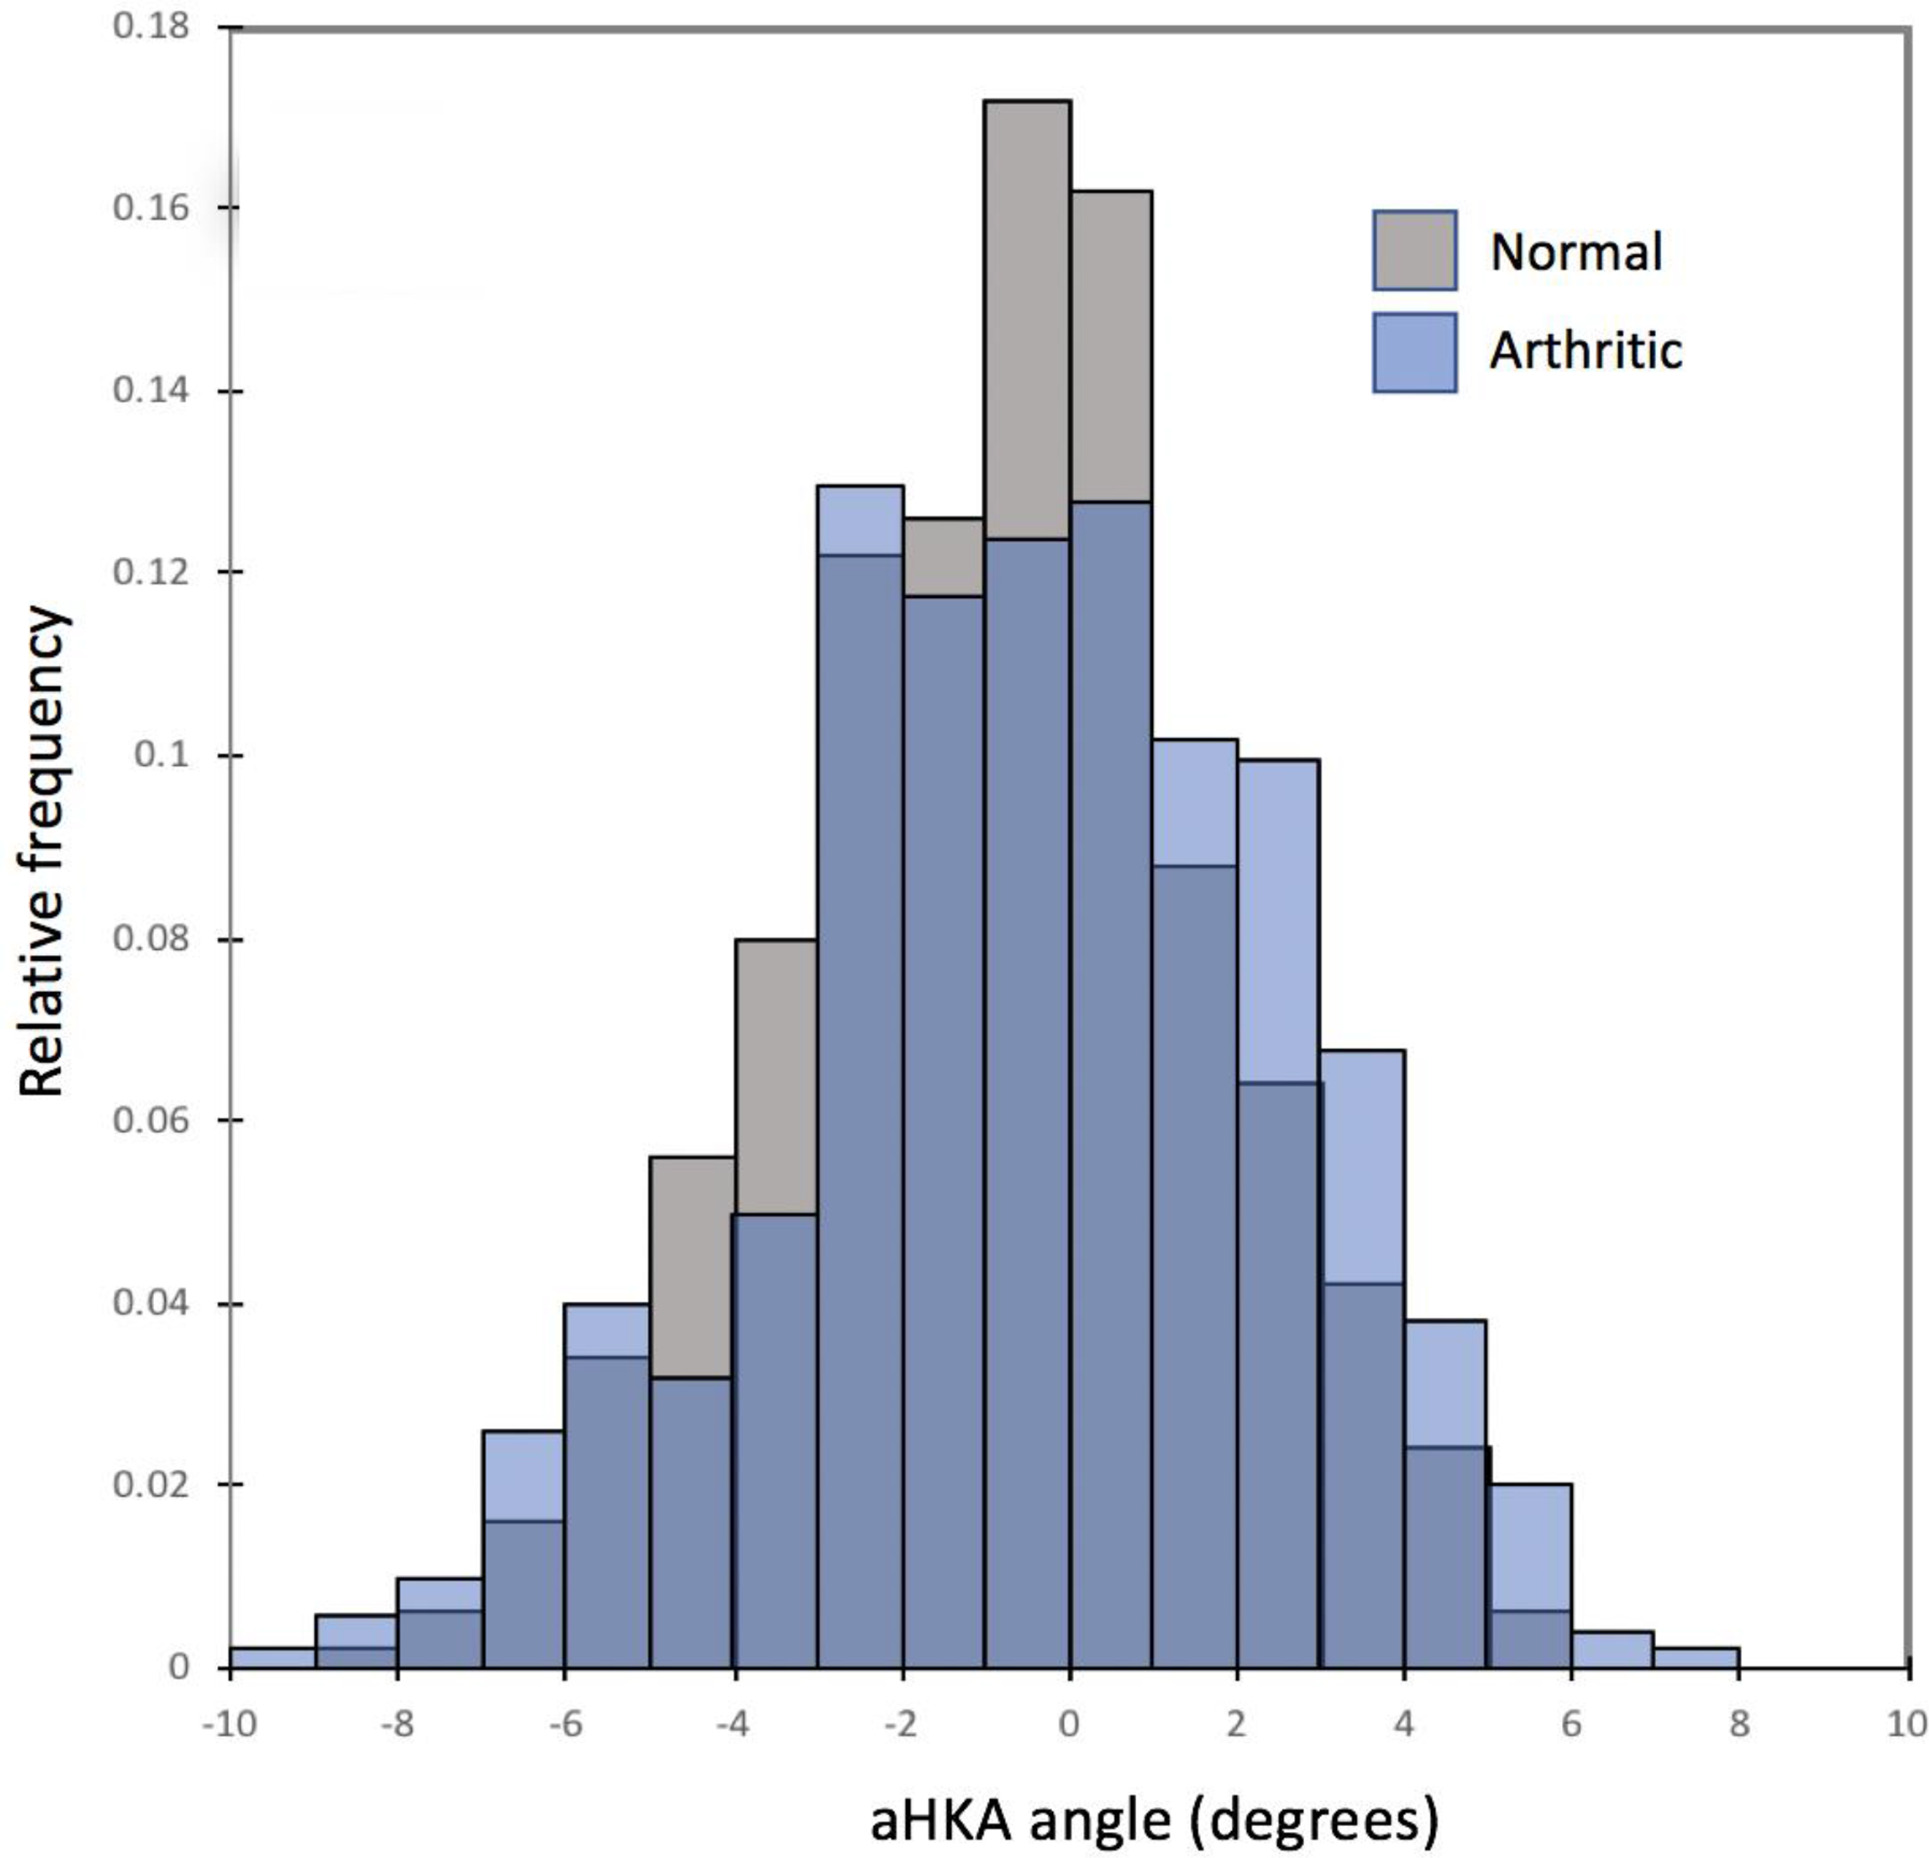 Fig. 5 
            Arithmetic hip-knee-ankle angle (aHKA) in normal and arthritic groups showing similar centrality and dispersion. Negative values on horizontal axis represent varus, with positive values representing valgus.
          